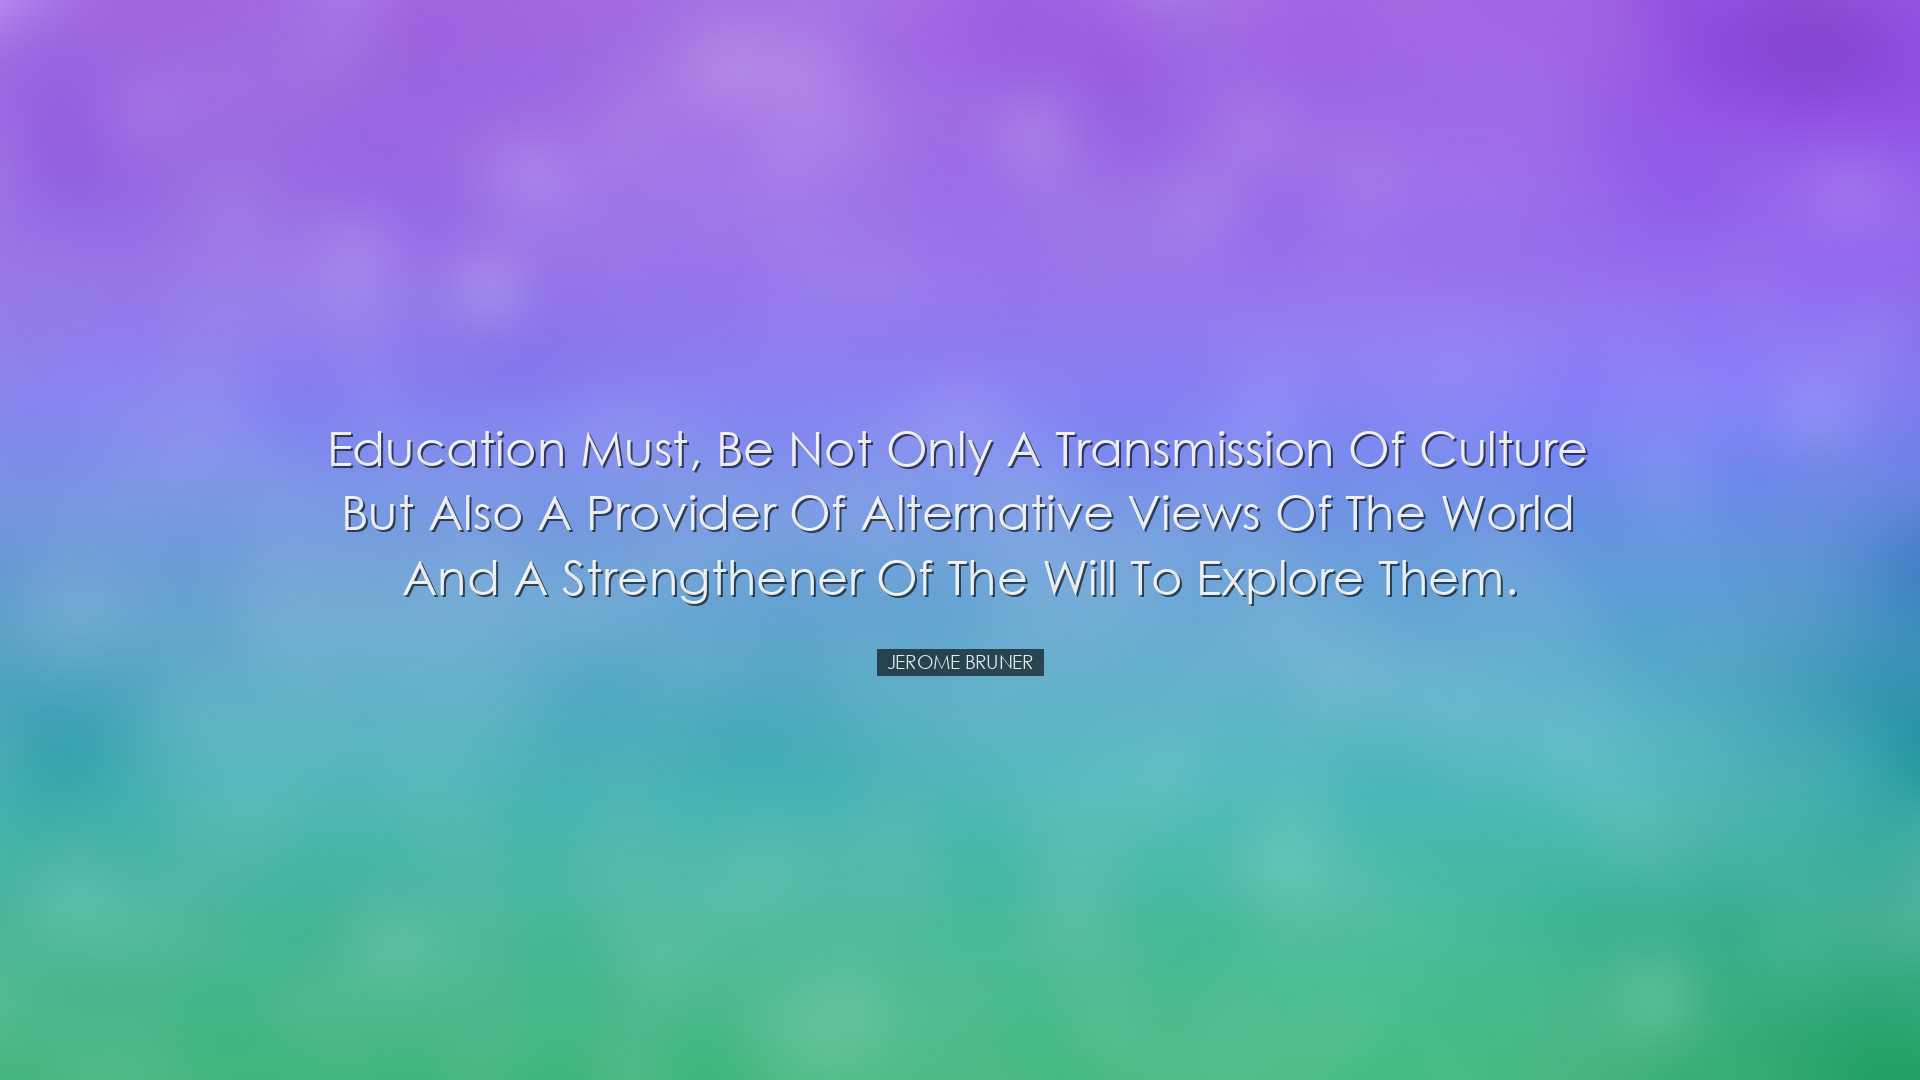 Education must, be not only a transmission of culture but also a p